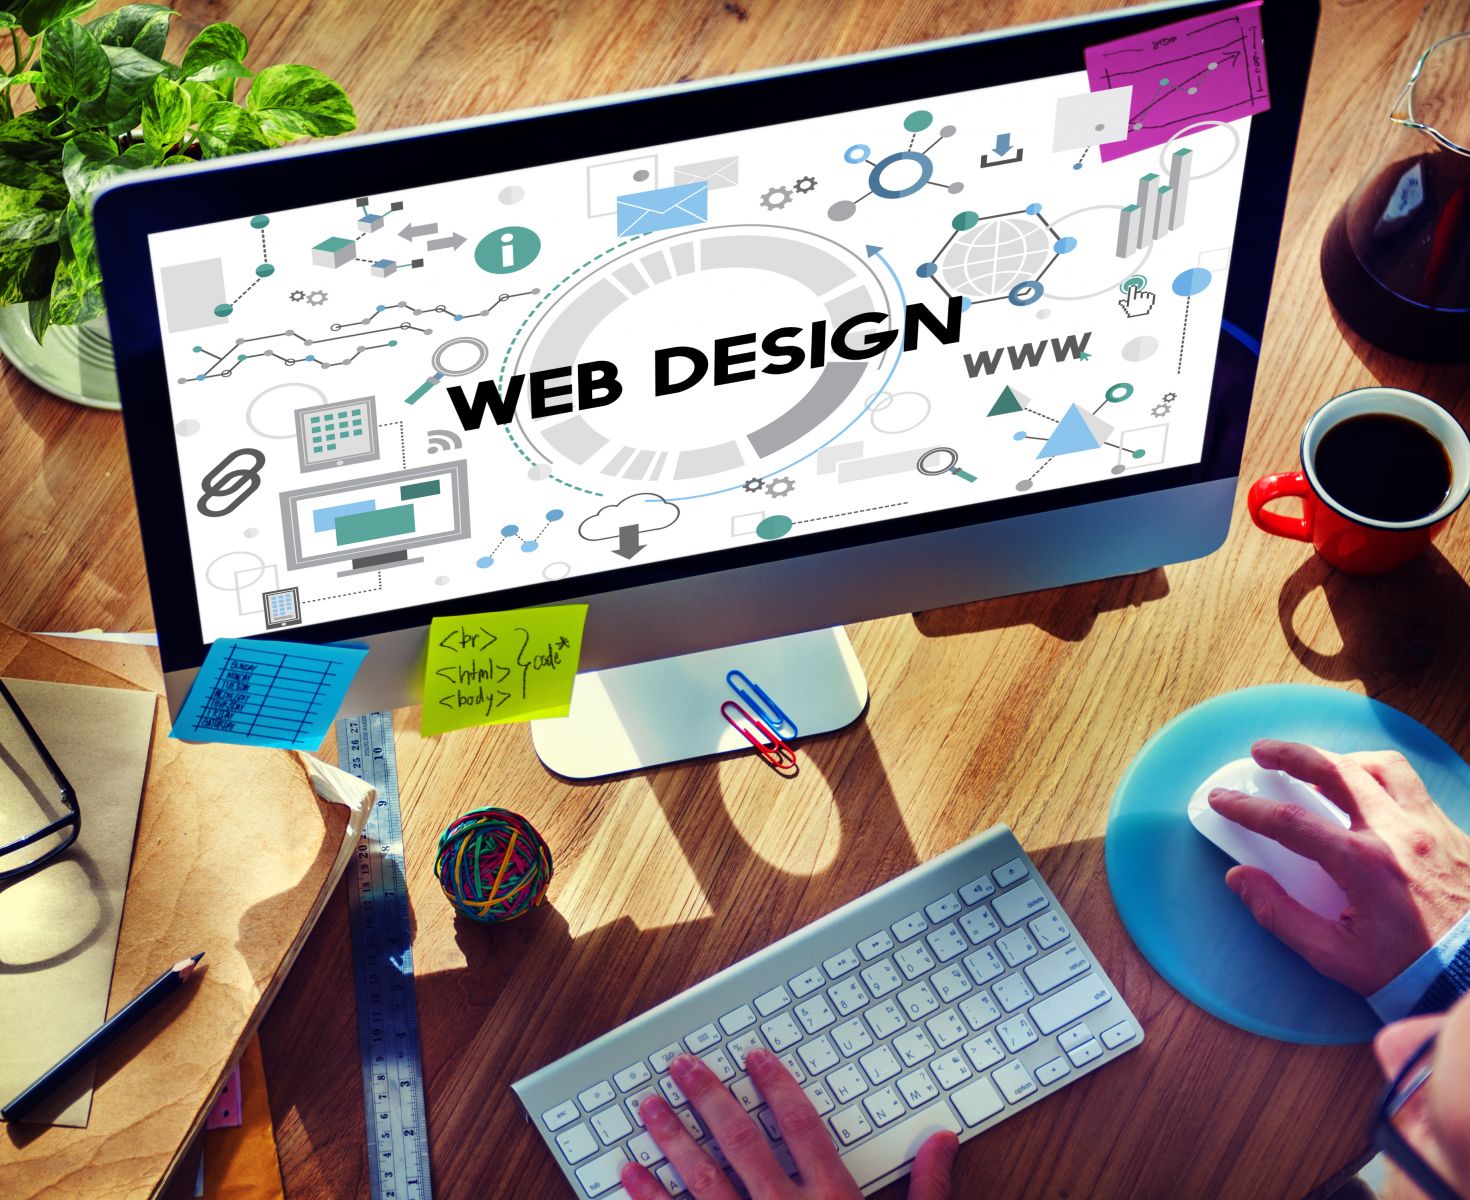 Web design resilience